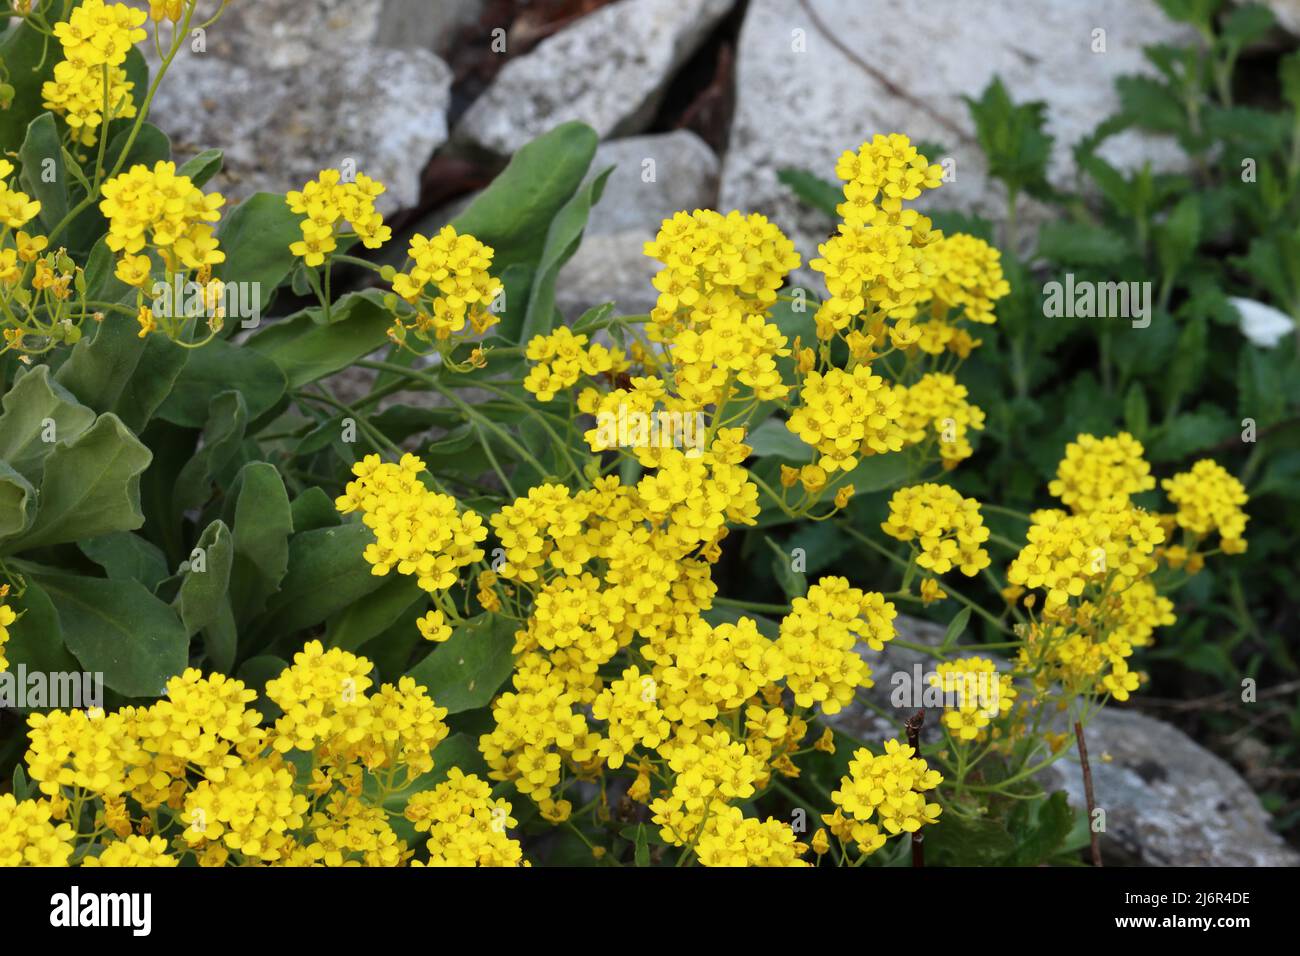 The flowers of a yellow alyssum incline gracefully over gray boulders Stock Photo